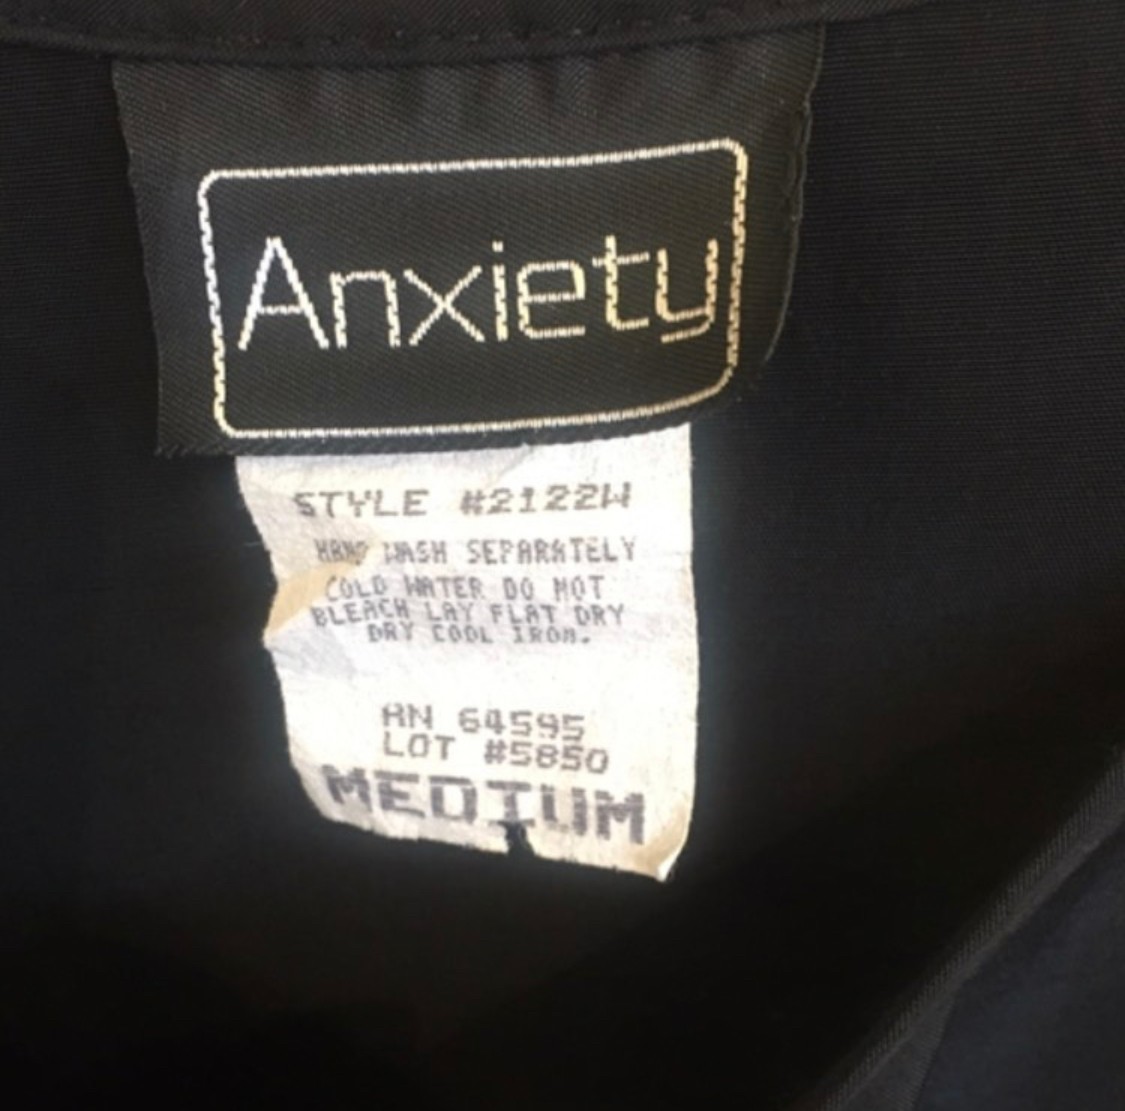 Anxiety clothing